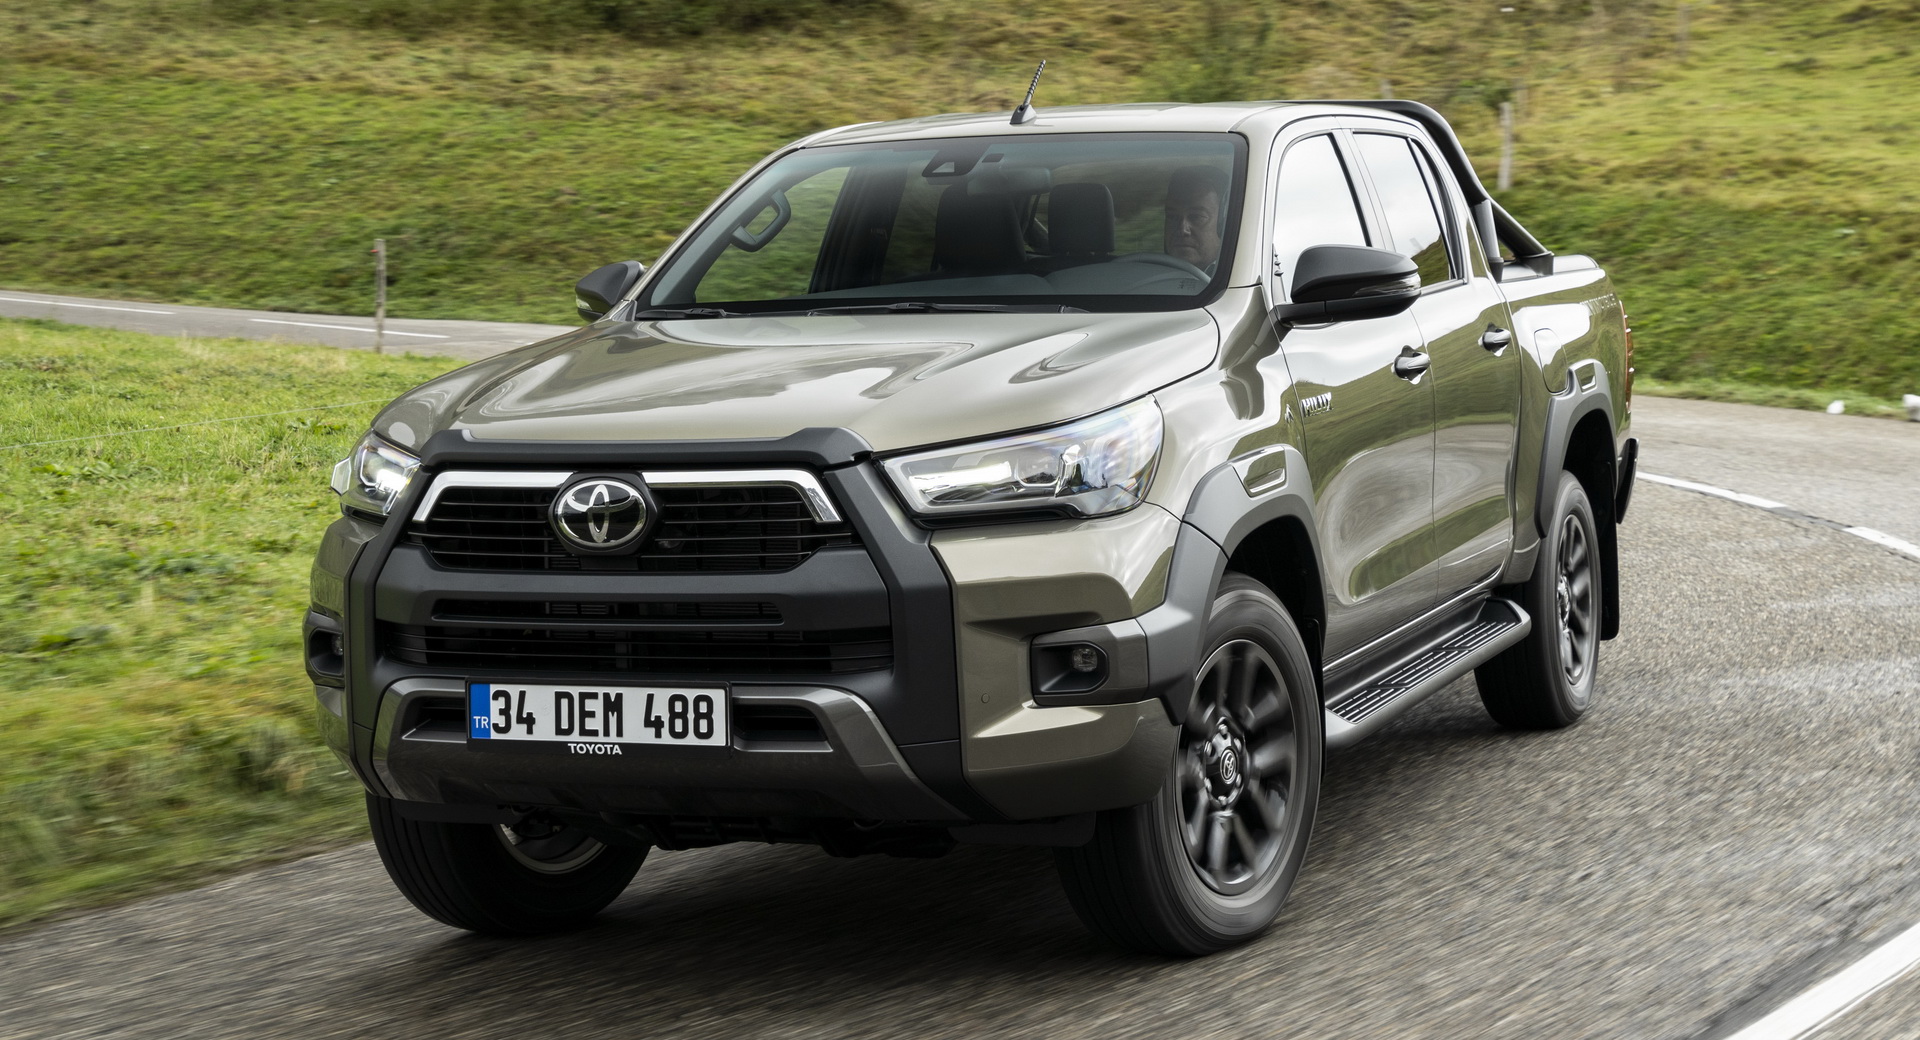 stap Zorg grote Oceaan Updated 2020 Toyota Hilux Reaches Europe With More Power, Improved Comfort  | Carscoops